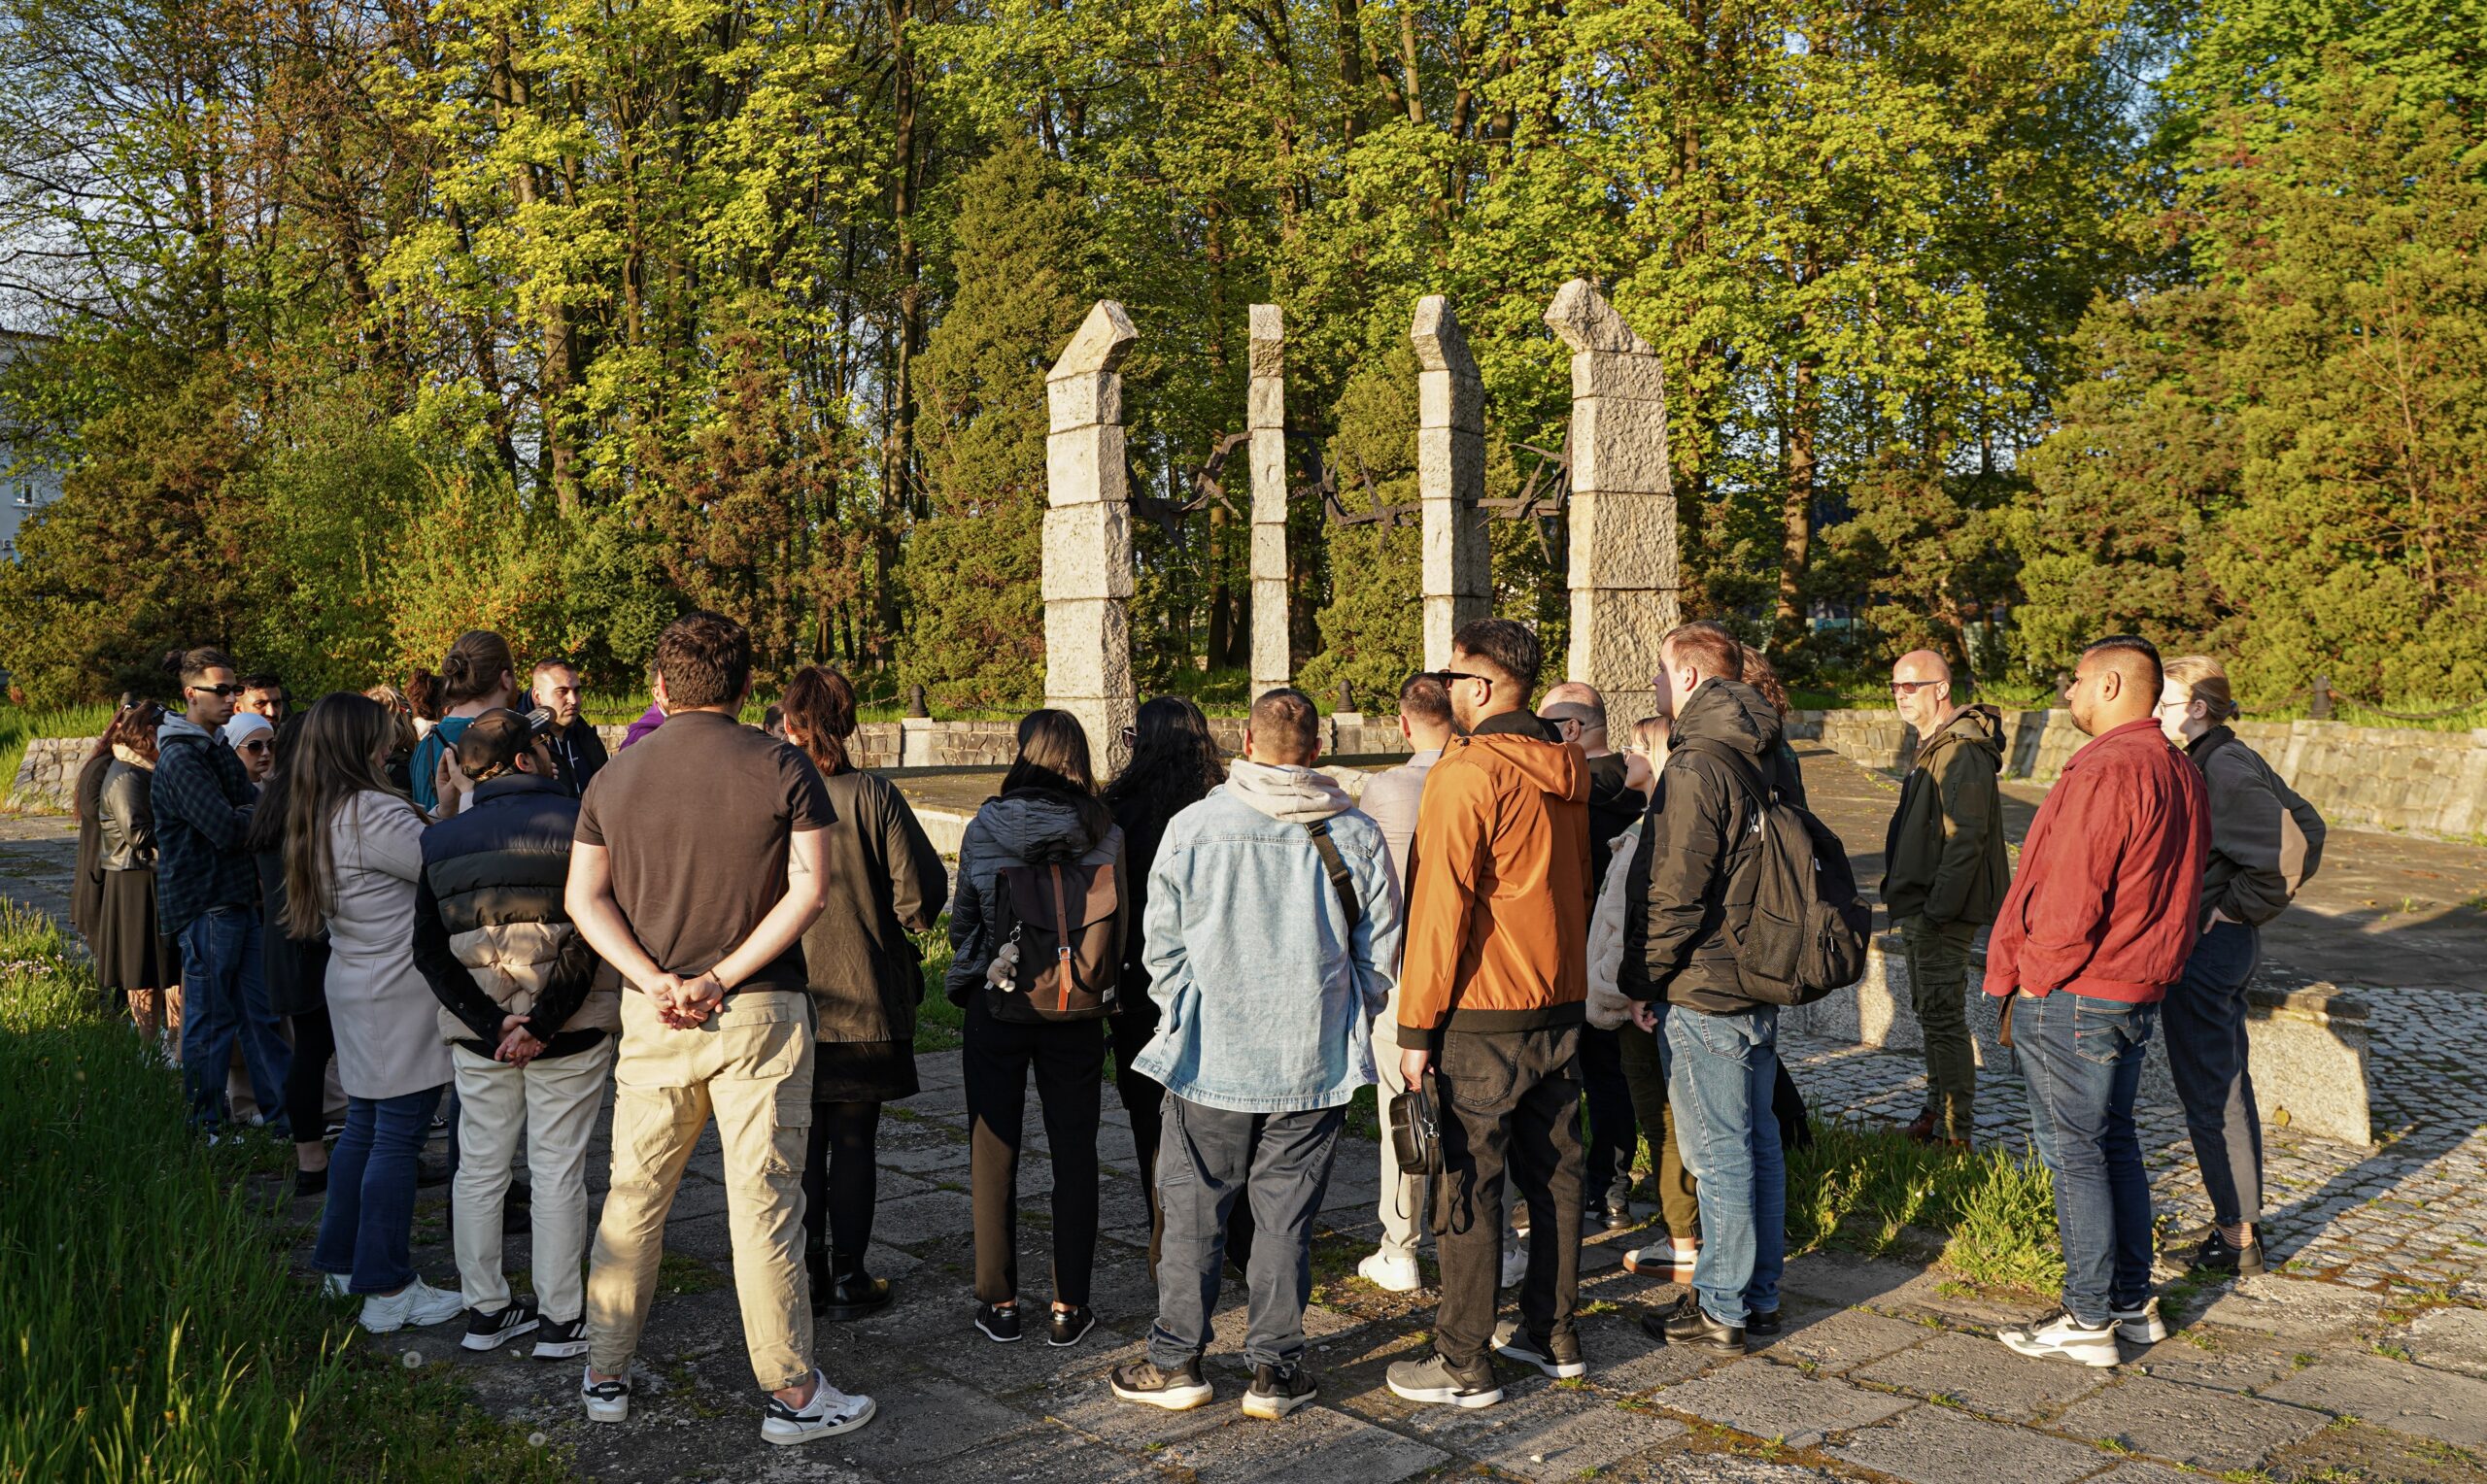 A group stands in front of a monument.